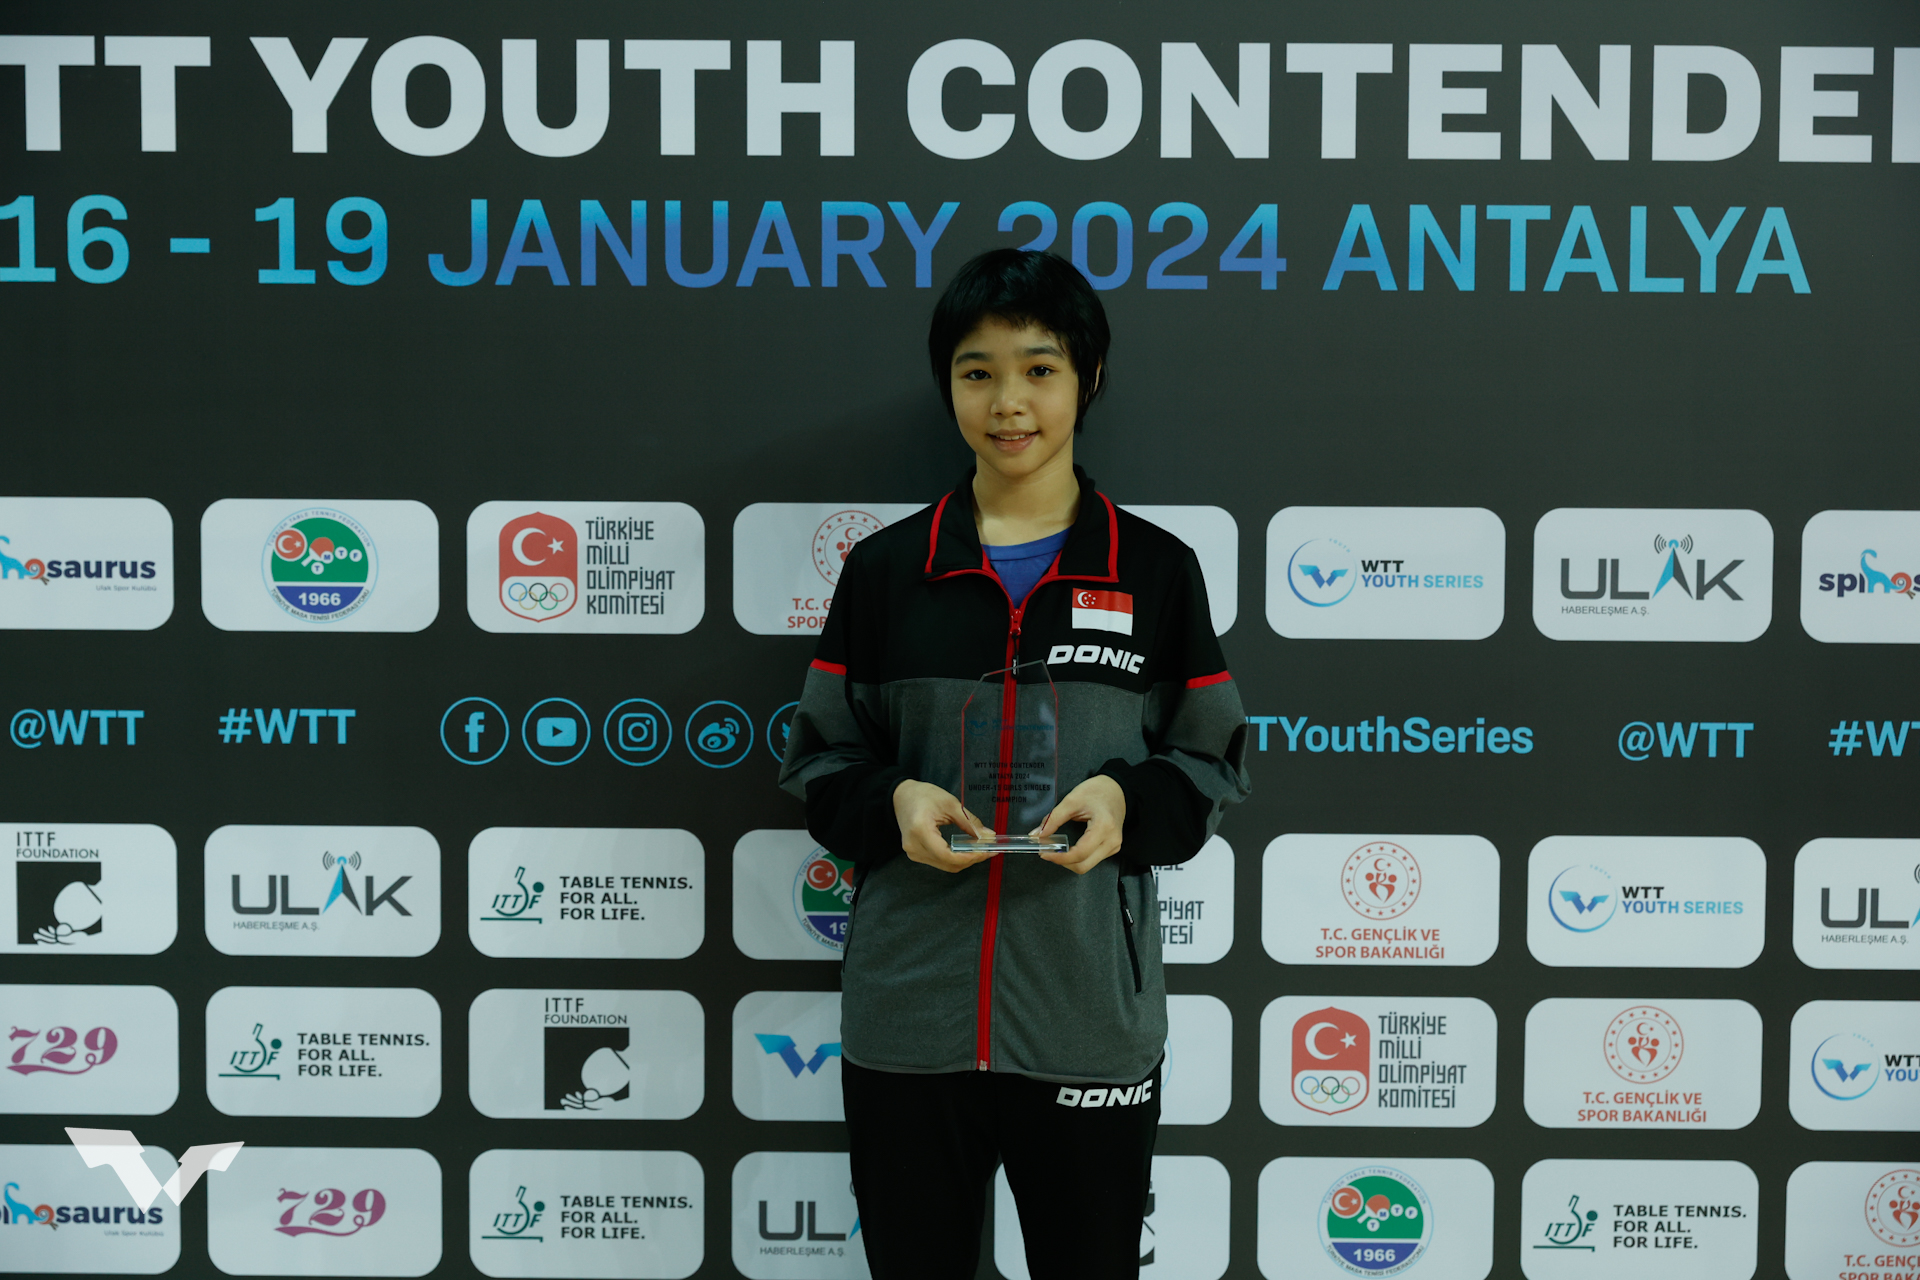 Loy Ming Ying is Girls U15 Singles Champion at WTT Youth Contender